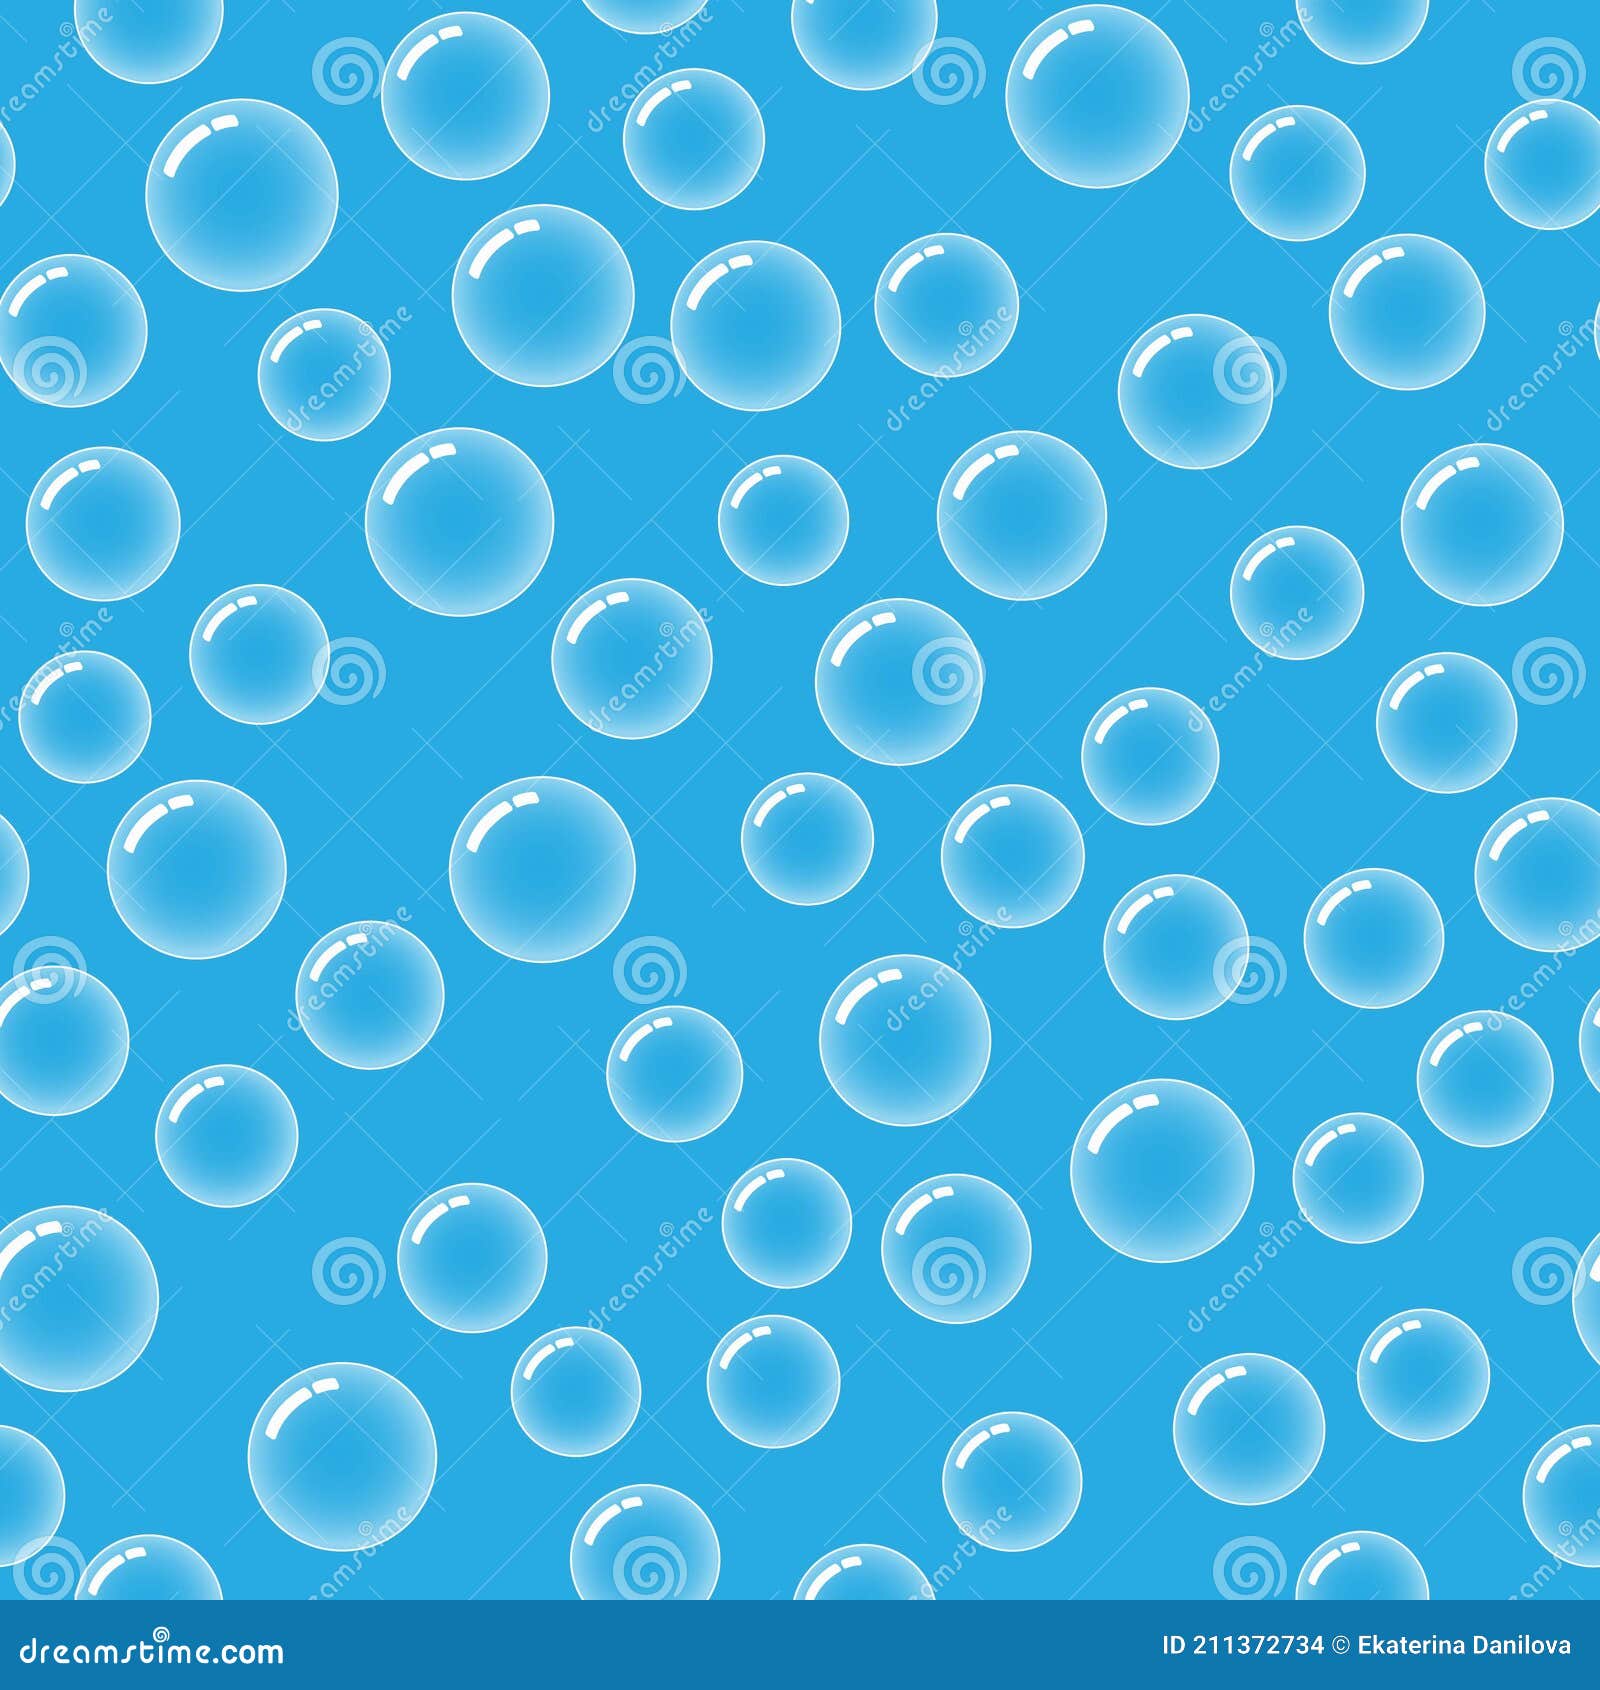 seamless pattern with soap bubbles. blue water. bright sea. cartoon style